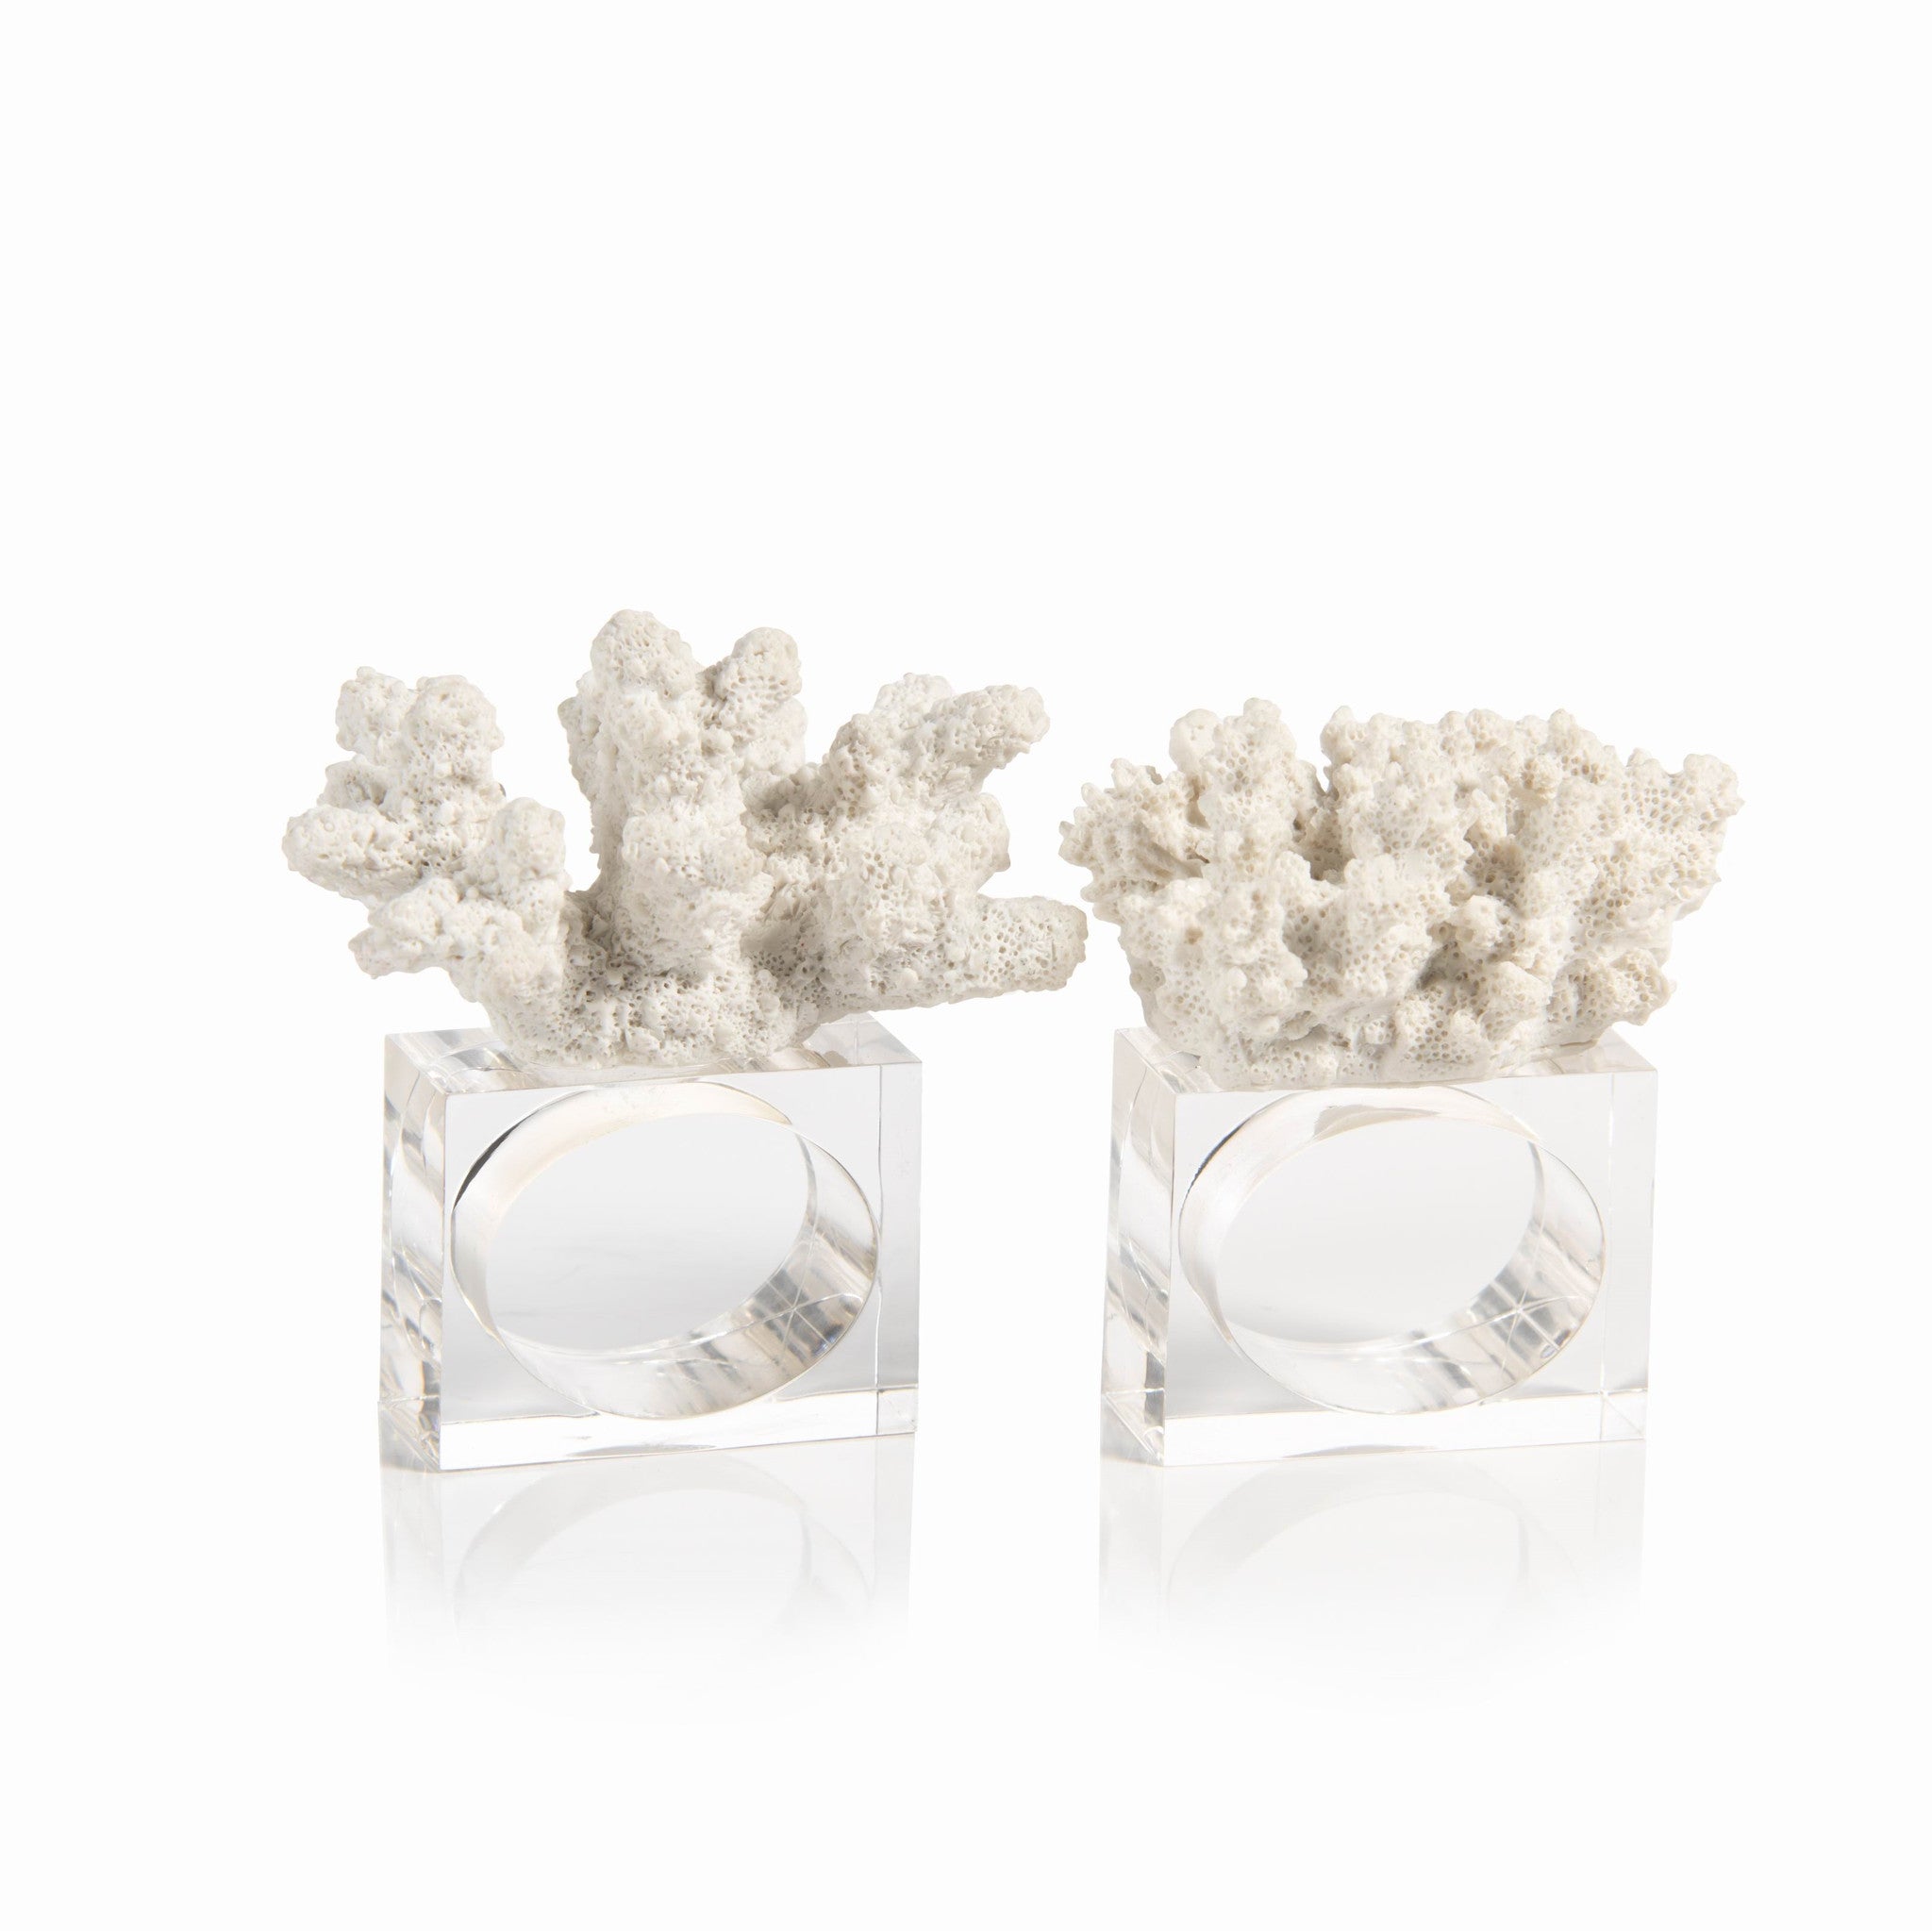 Coral Napkin Rings - Set of 6 - CARLYLE AVENUE